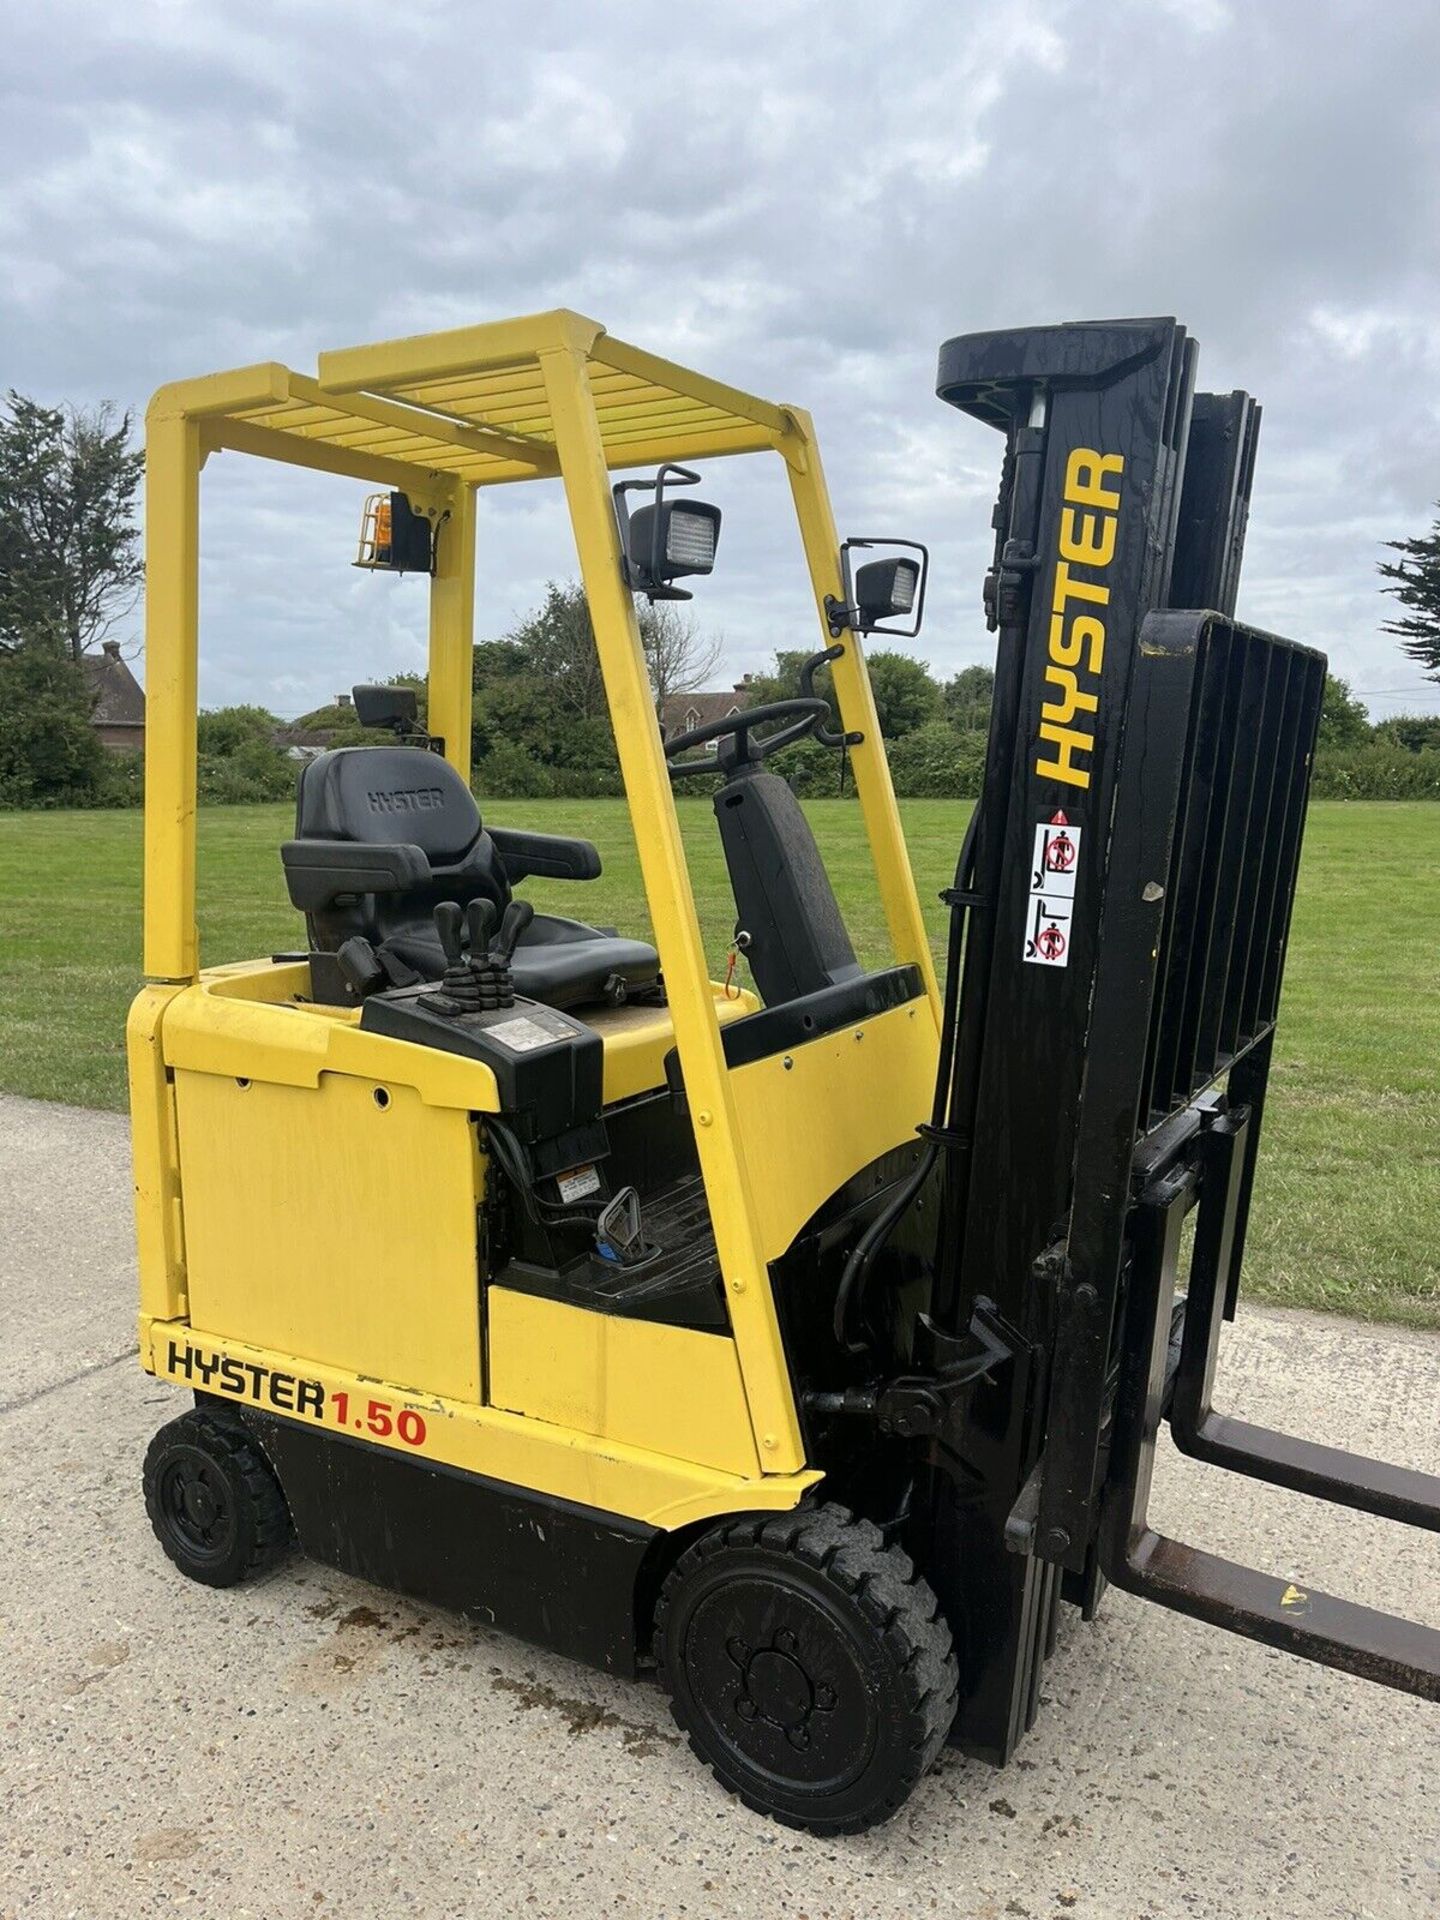 HYSTER, 1.5 Electric Forklift Truck - Image 2 of 3